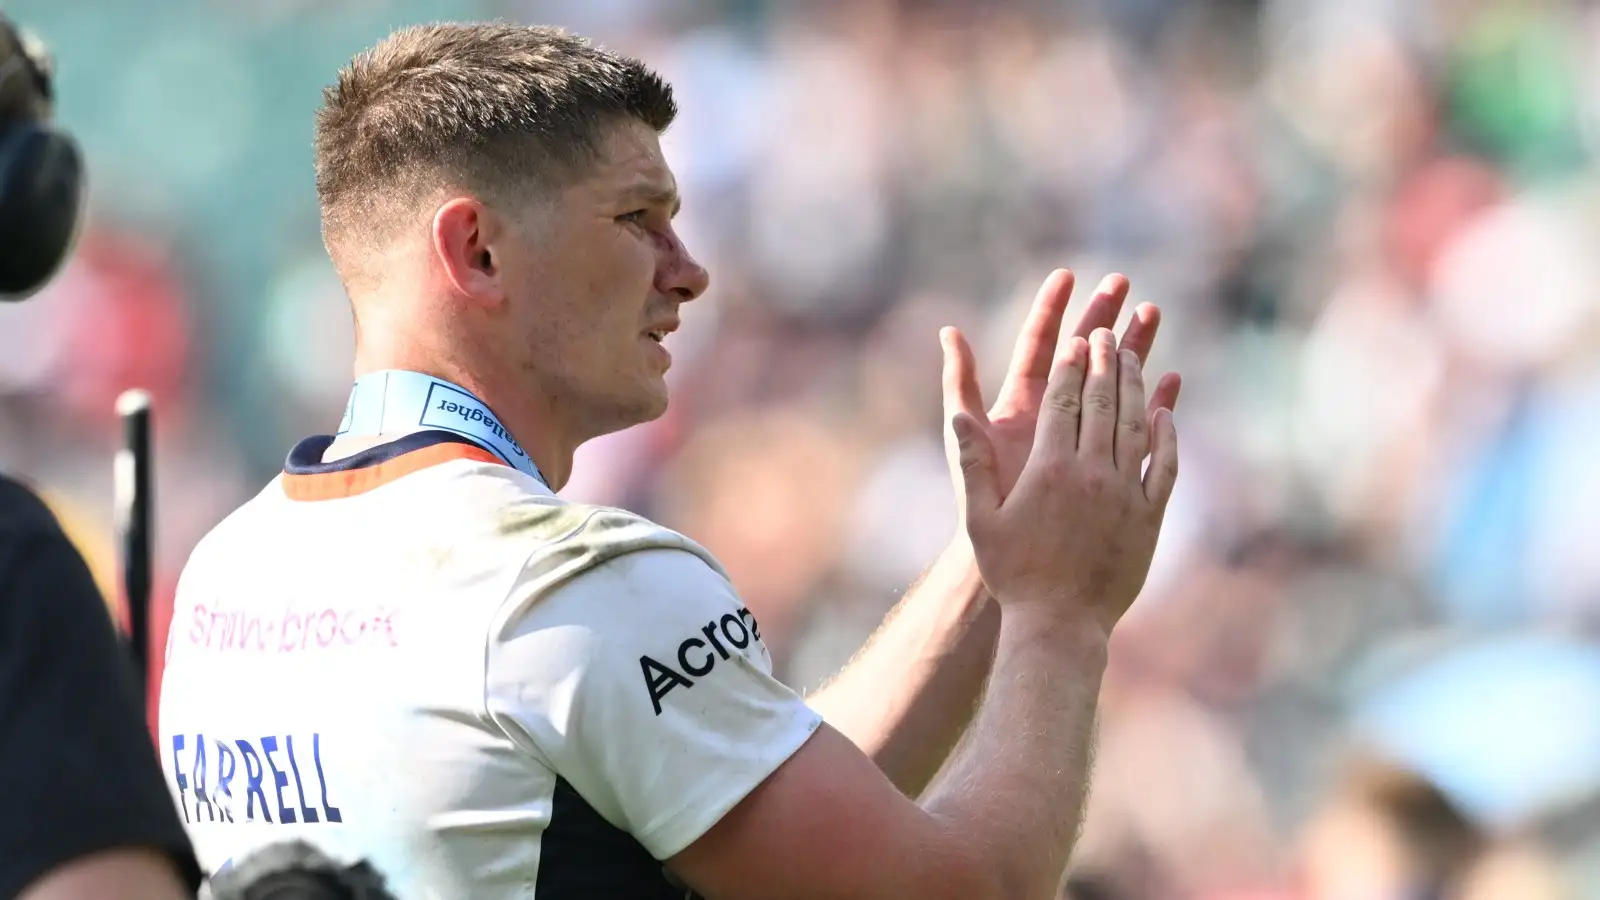 Owen Farrell left broken hearted with Wigan cross-code switch dream fading despite ‘love’ admission